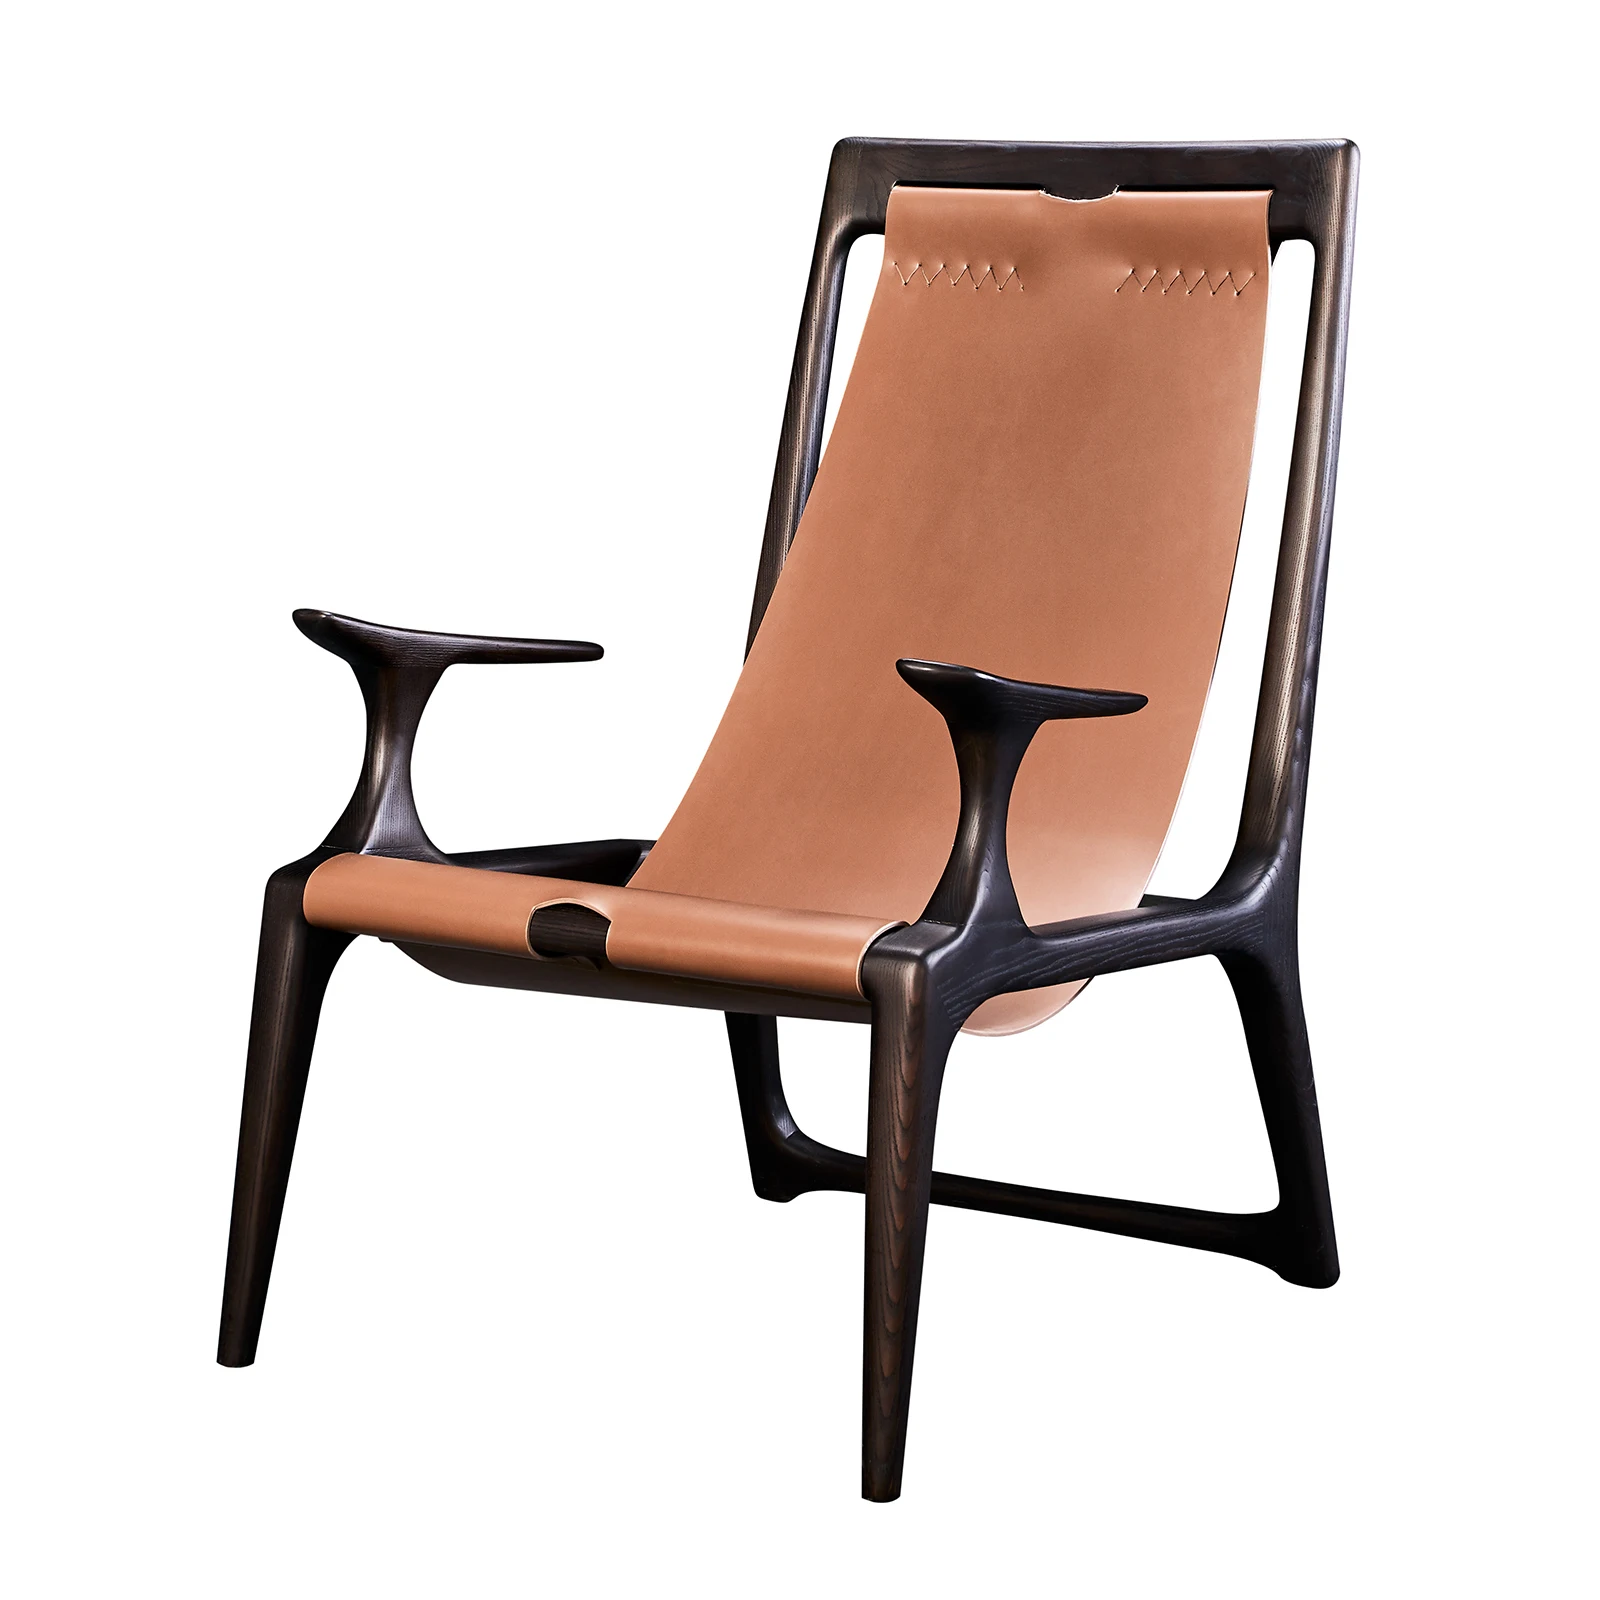 Outdoor Leather Lounge Chair Wooden Antique Leisure Chaise Wishbone Chair